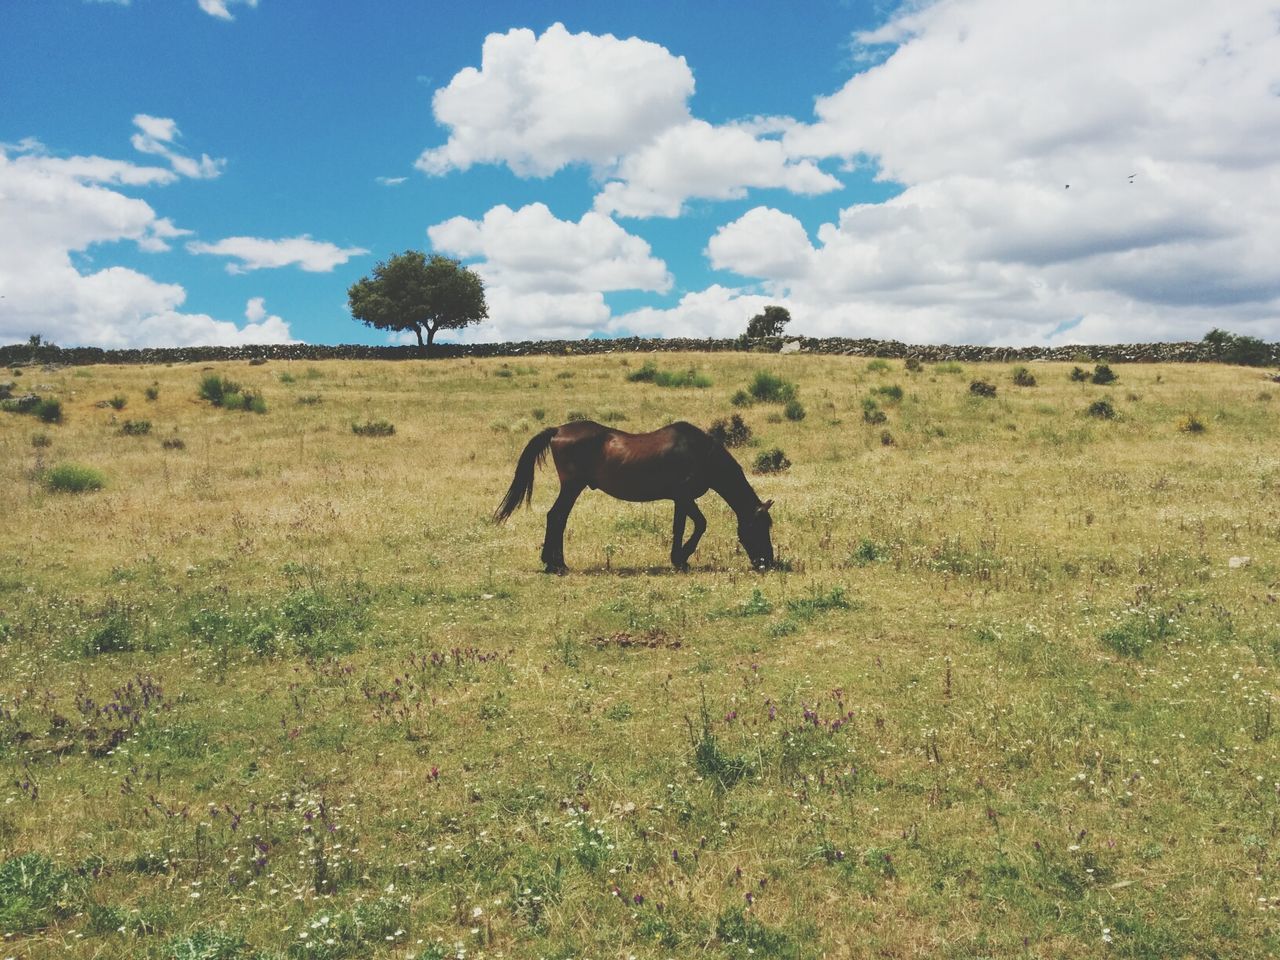 Side view of horse grazing on grassy field against cloudy sky